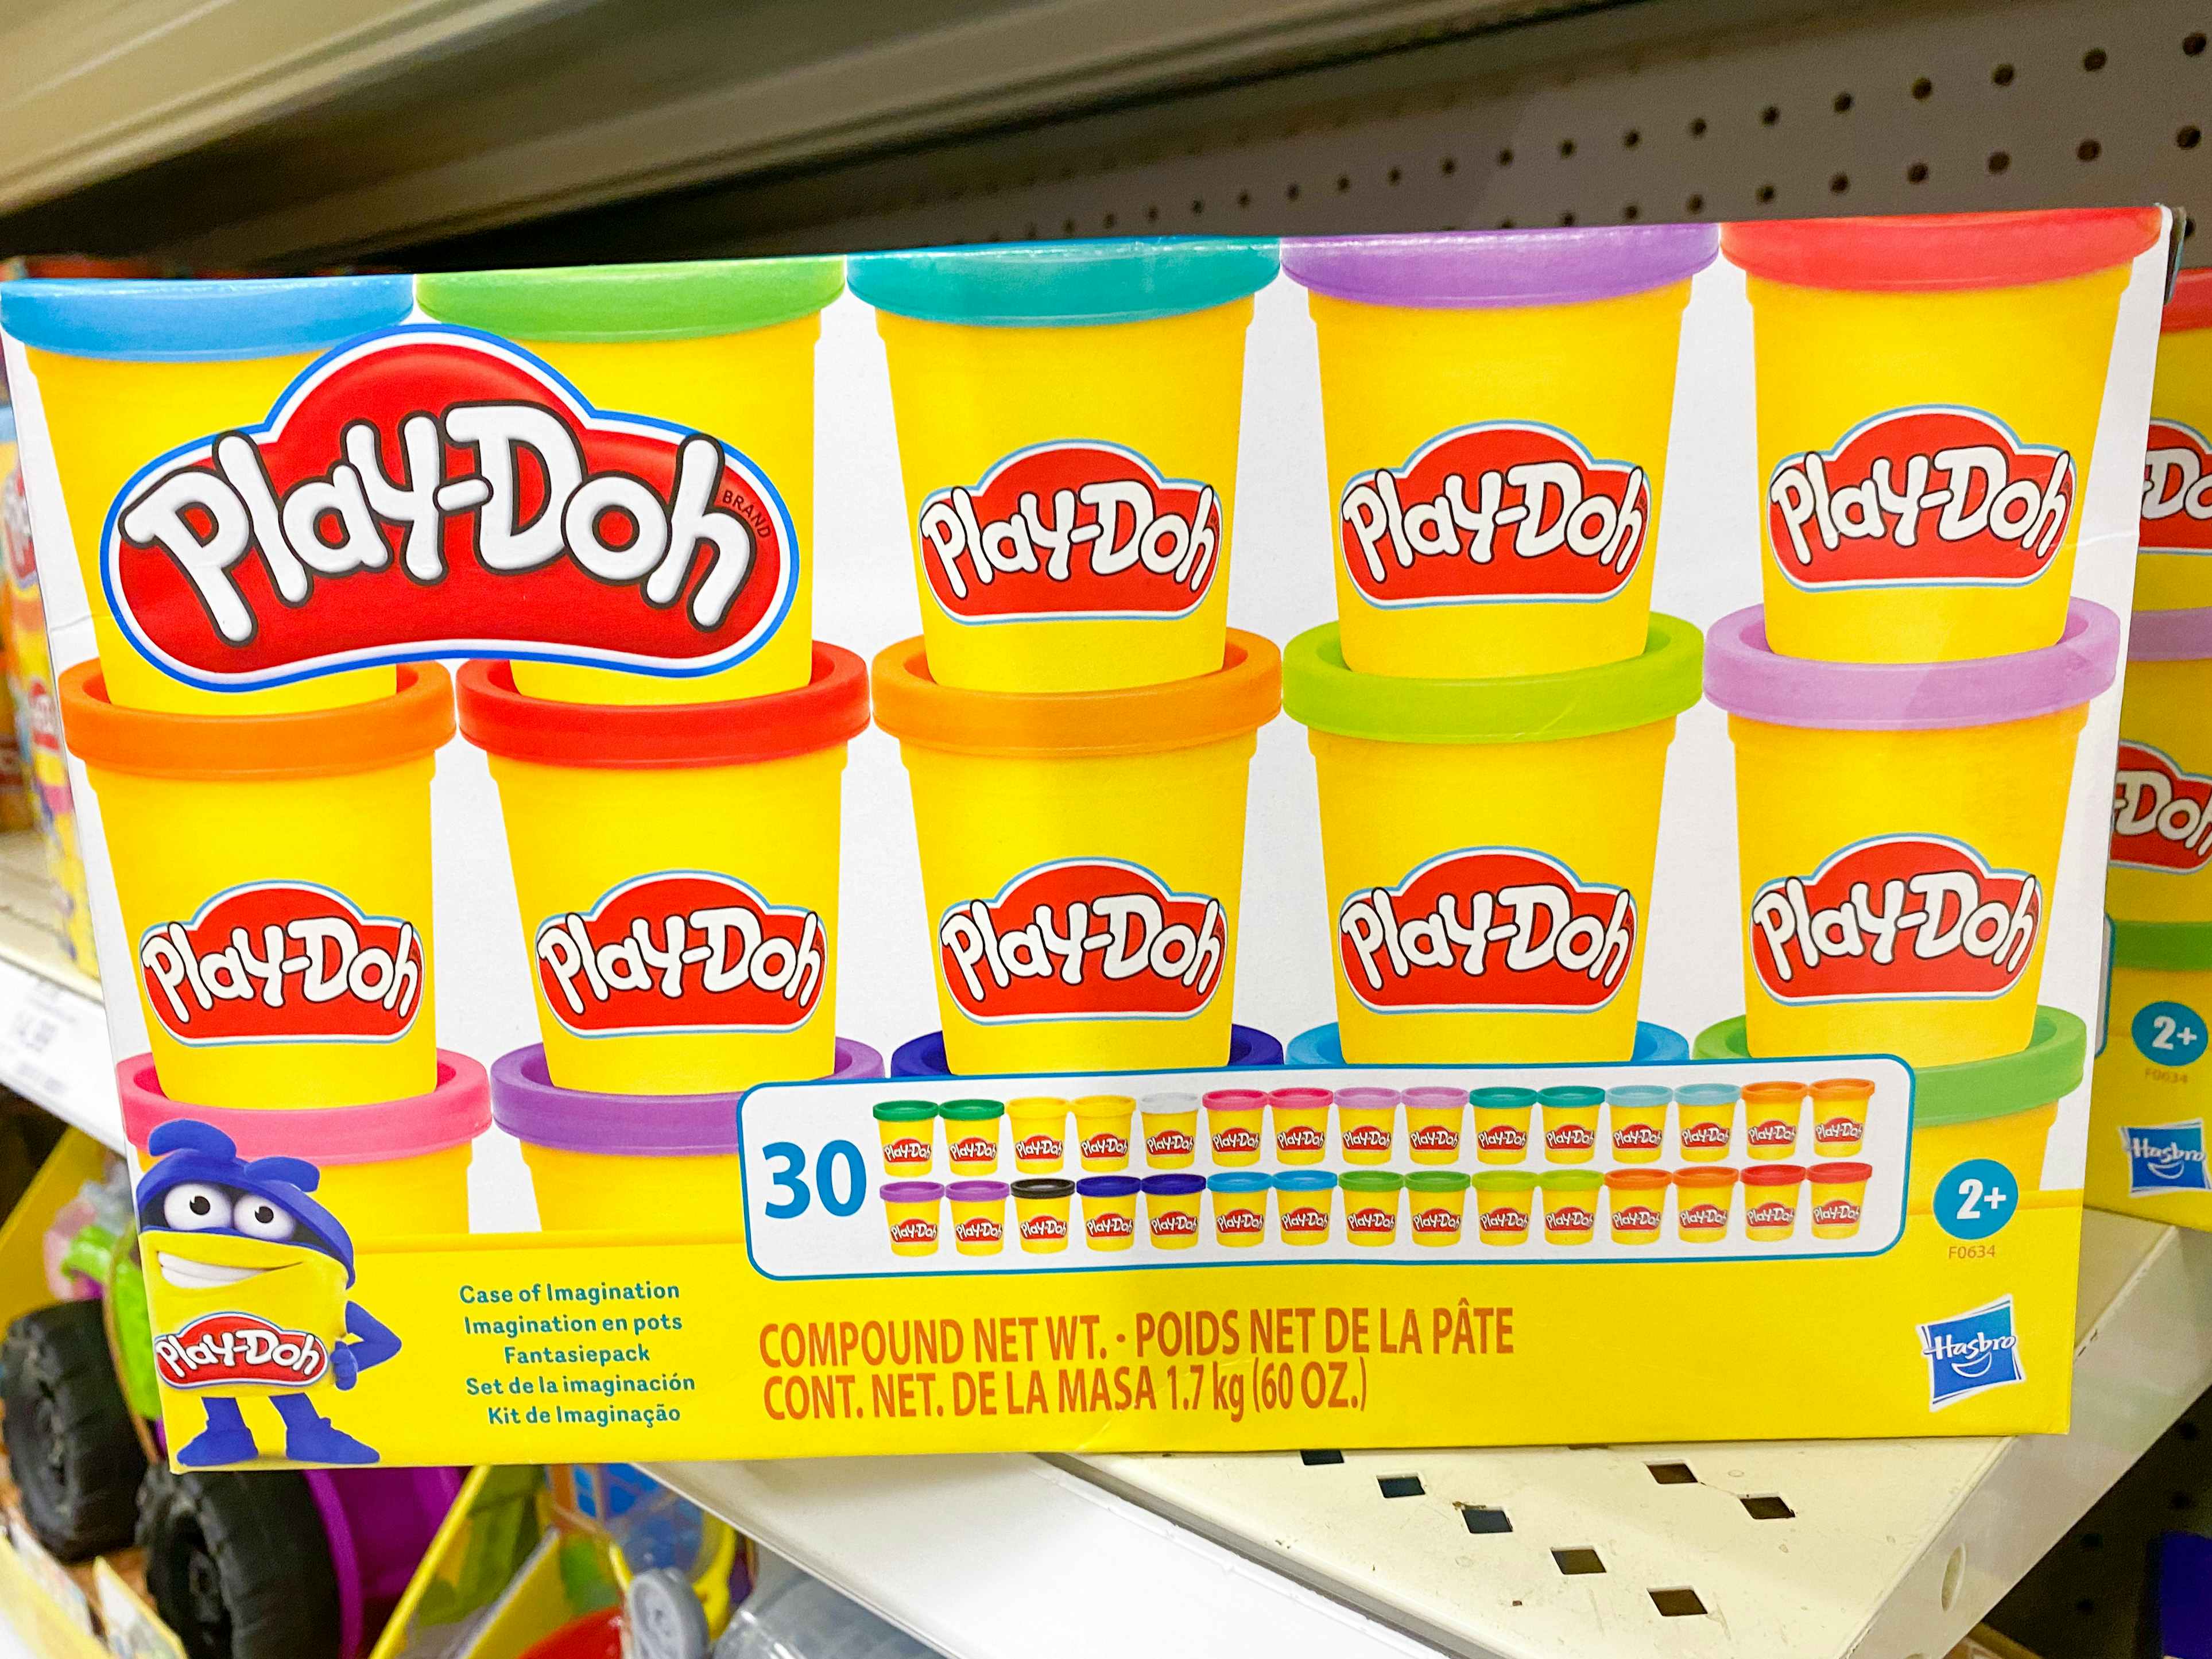 A box set of Play Doh on a shelf at Target.